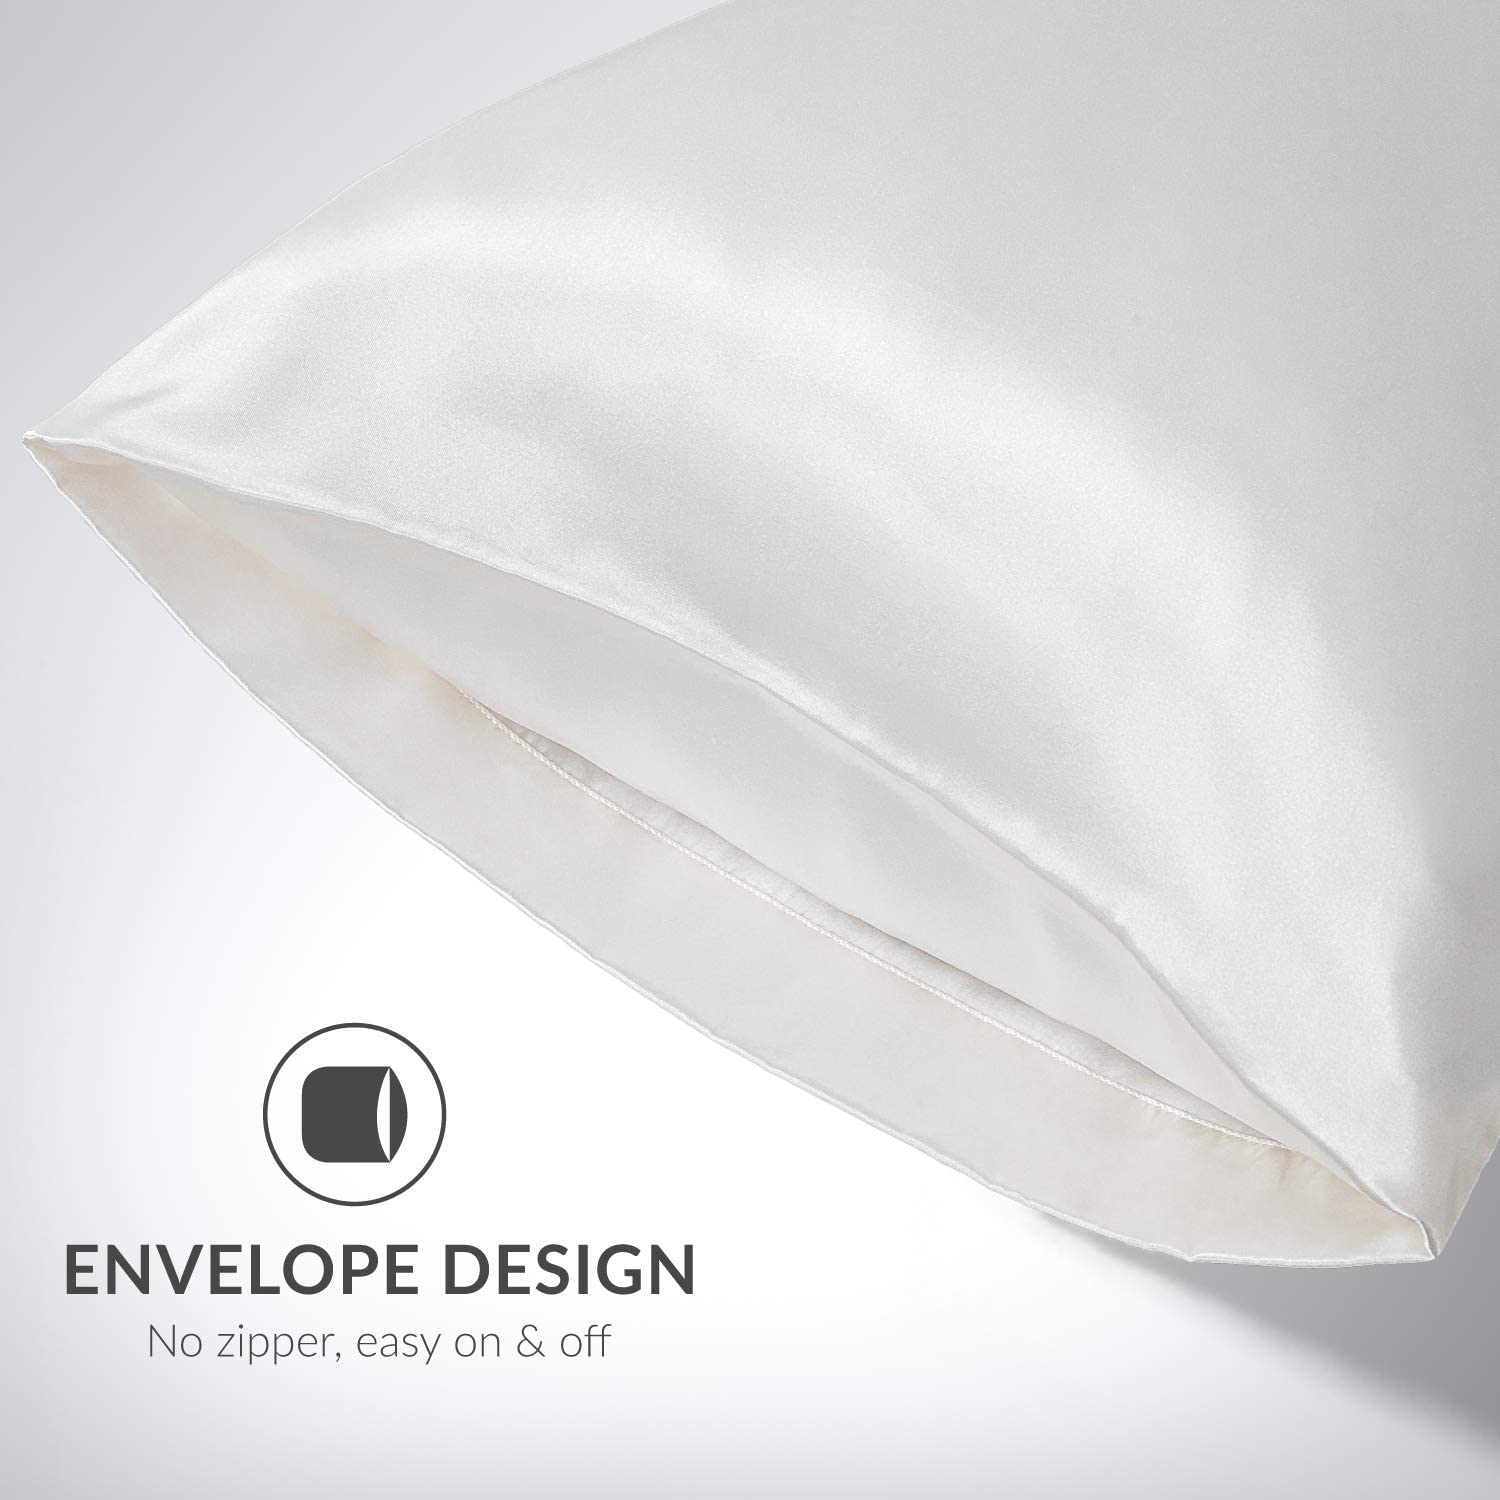 Bedsure Satin Pillowcase for Hair and Skin, 2-Pack - Queen Size (20x30 ...